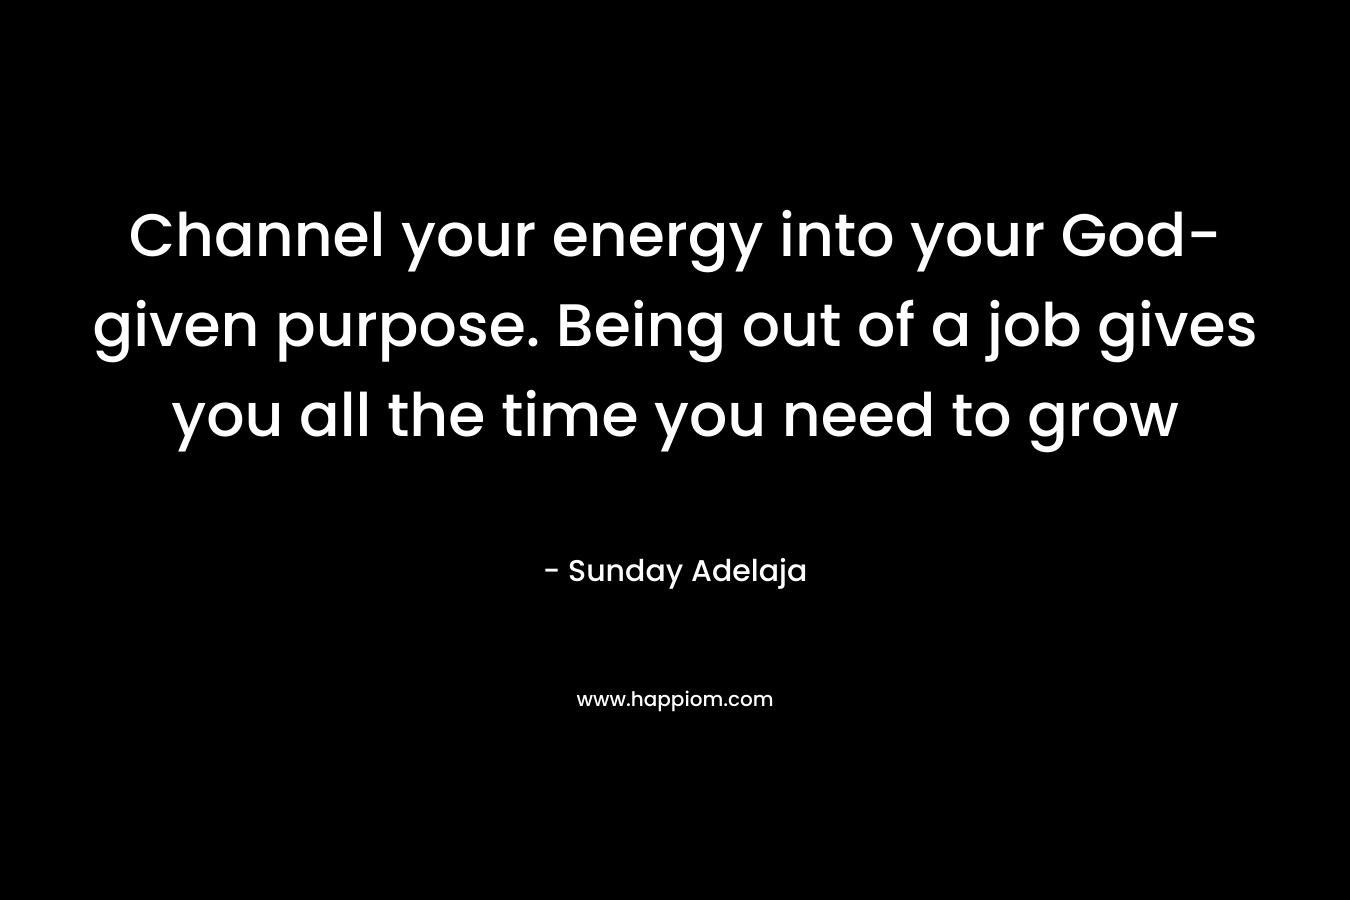 Channel your energy into your God-given purpose. Being out of a job gives you all the time you need to grow